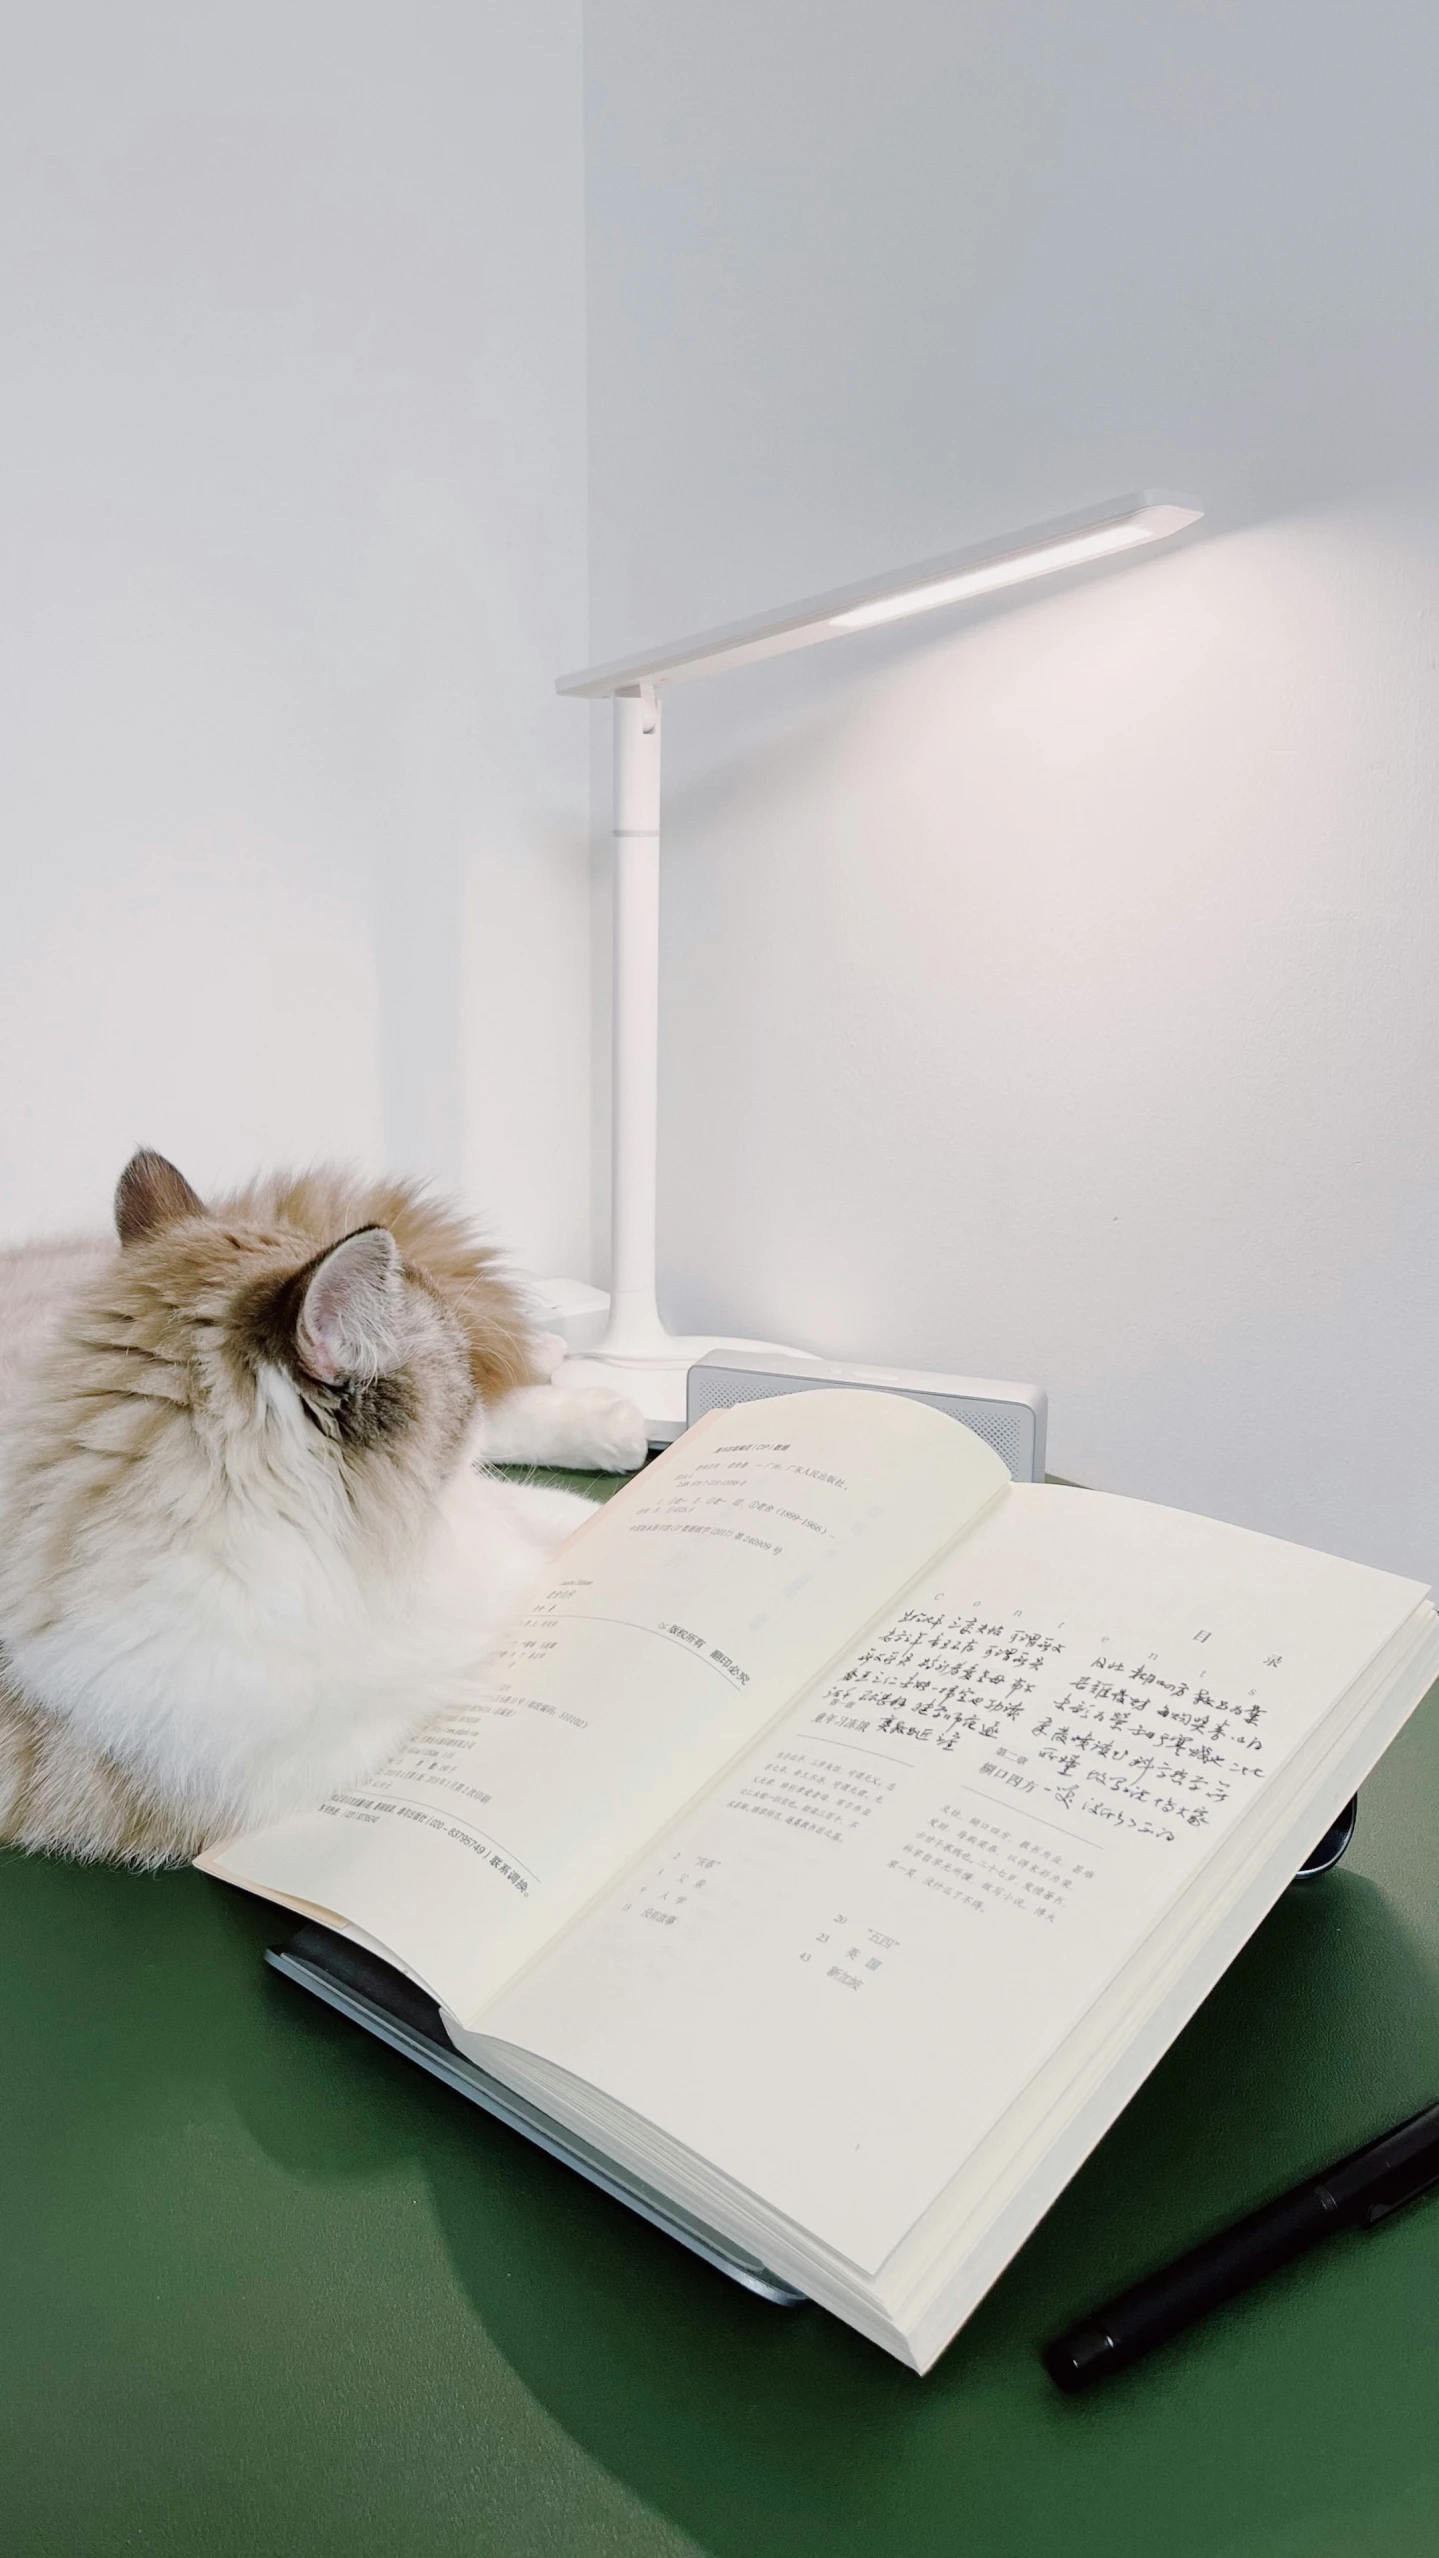 the cat is laying down by a book with a pen on it